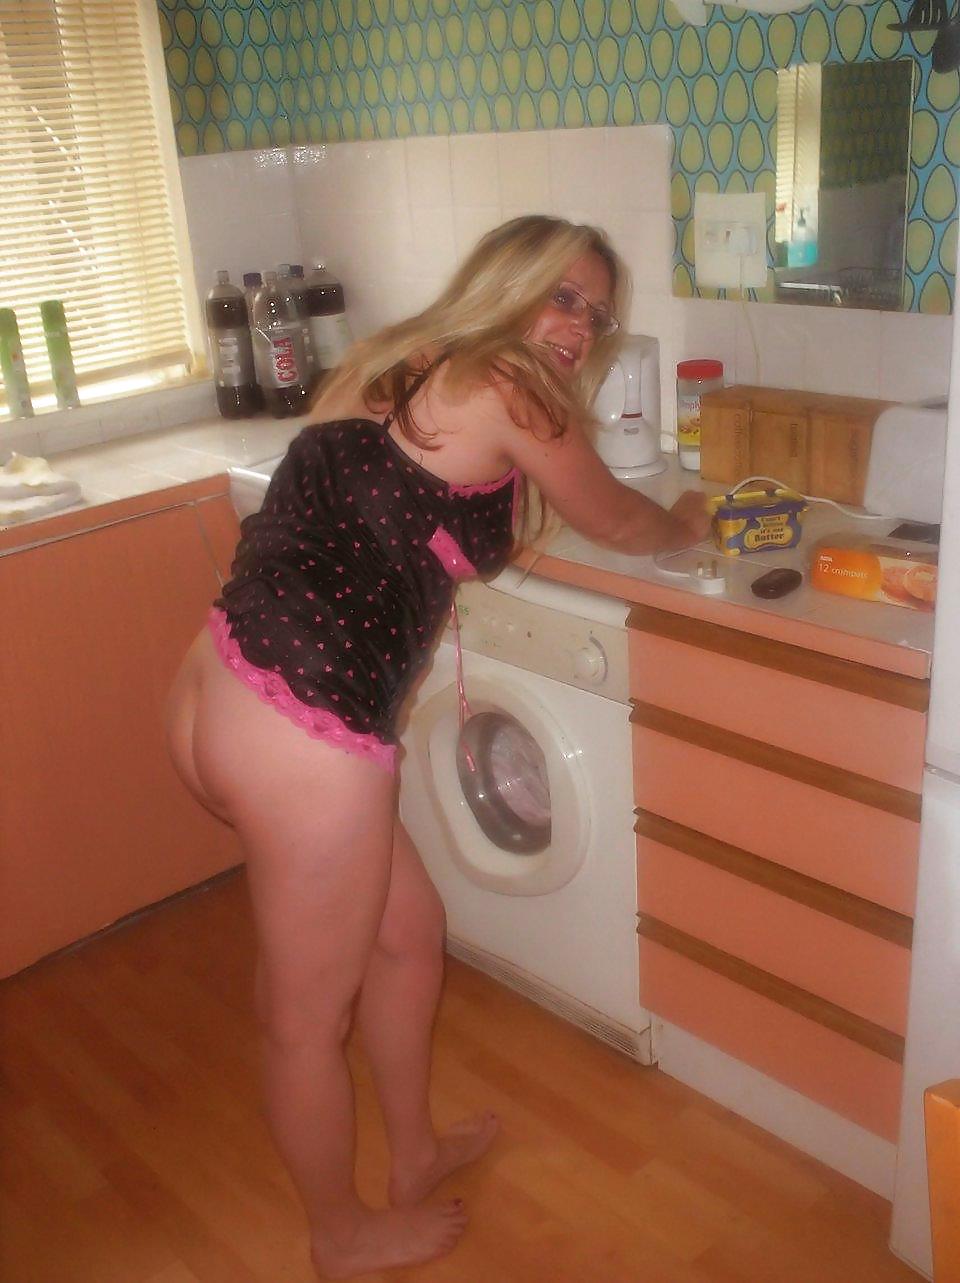 HOUSEWIVES ARE DAMN HORNY X #8621510